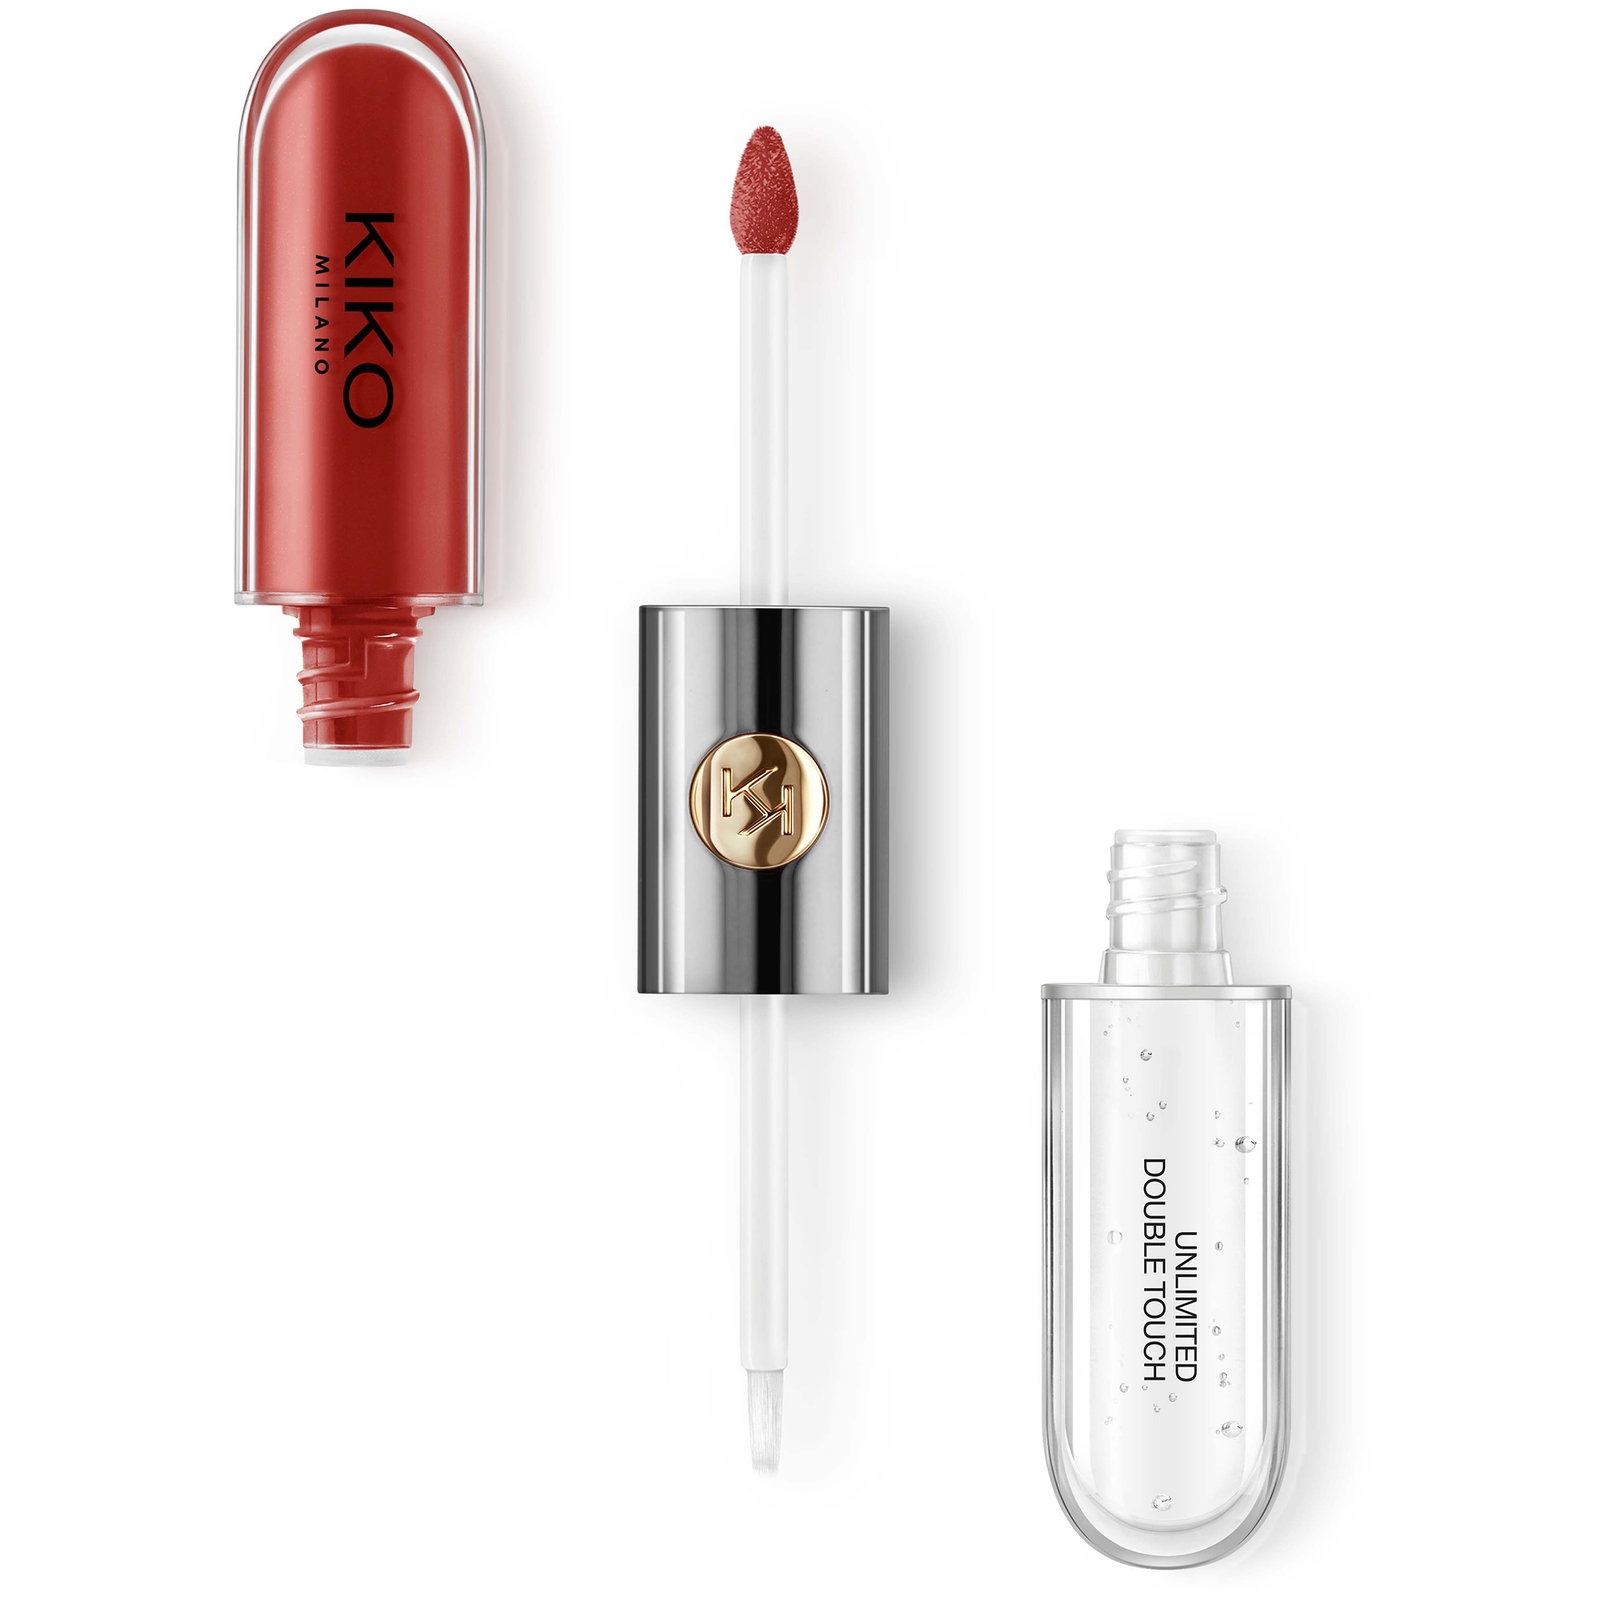 KIKO Milano Unlimited Double Touch 6ml (Various Shades) - 107 Cherry Red